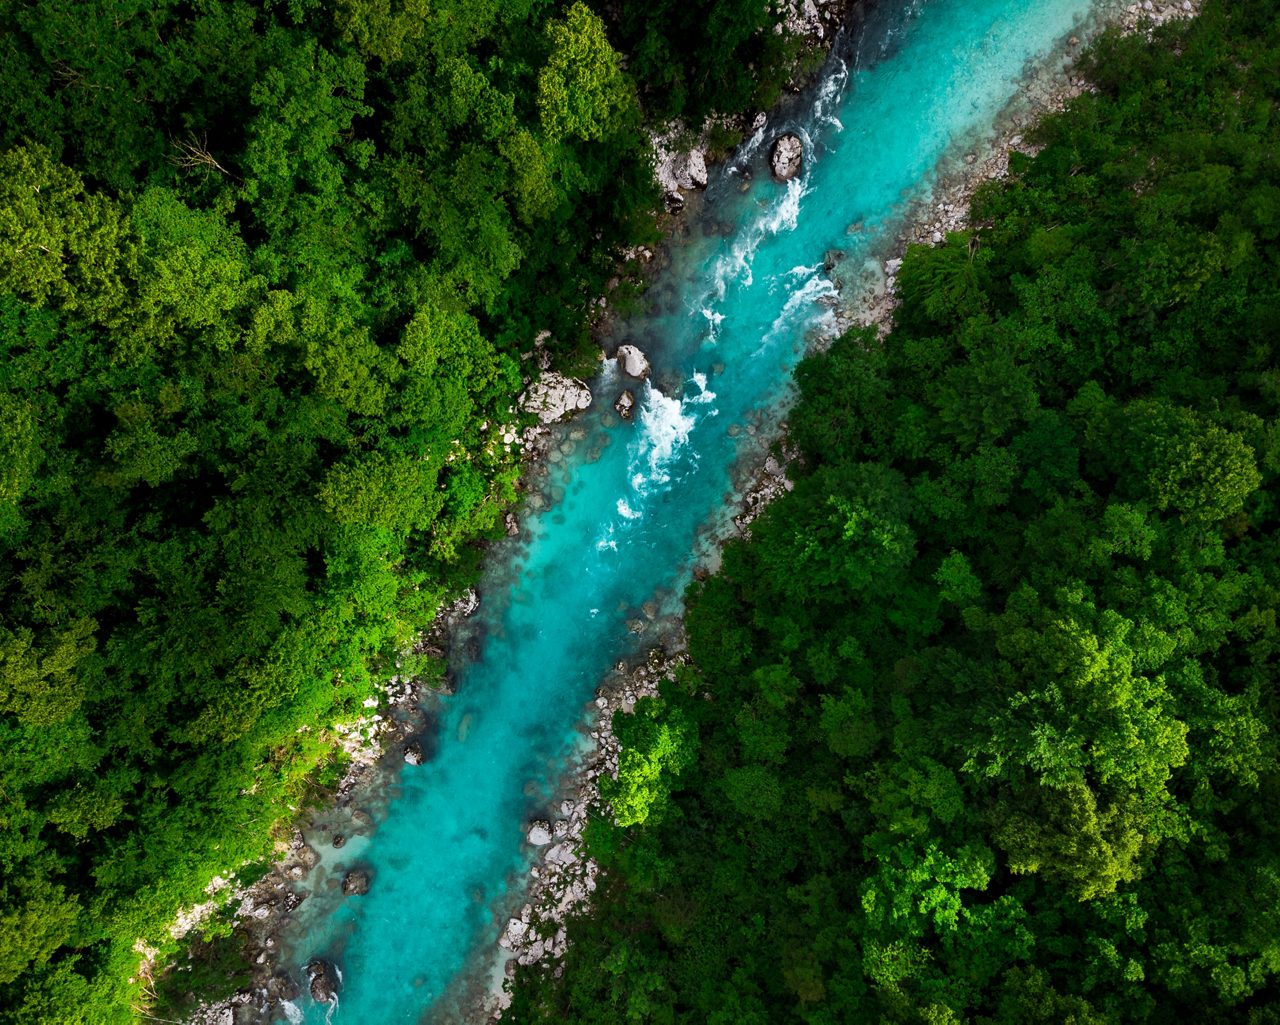 Blue River flowing in forest 